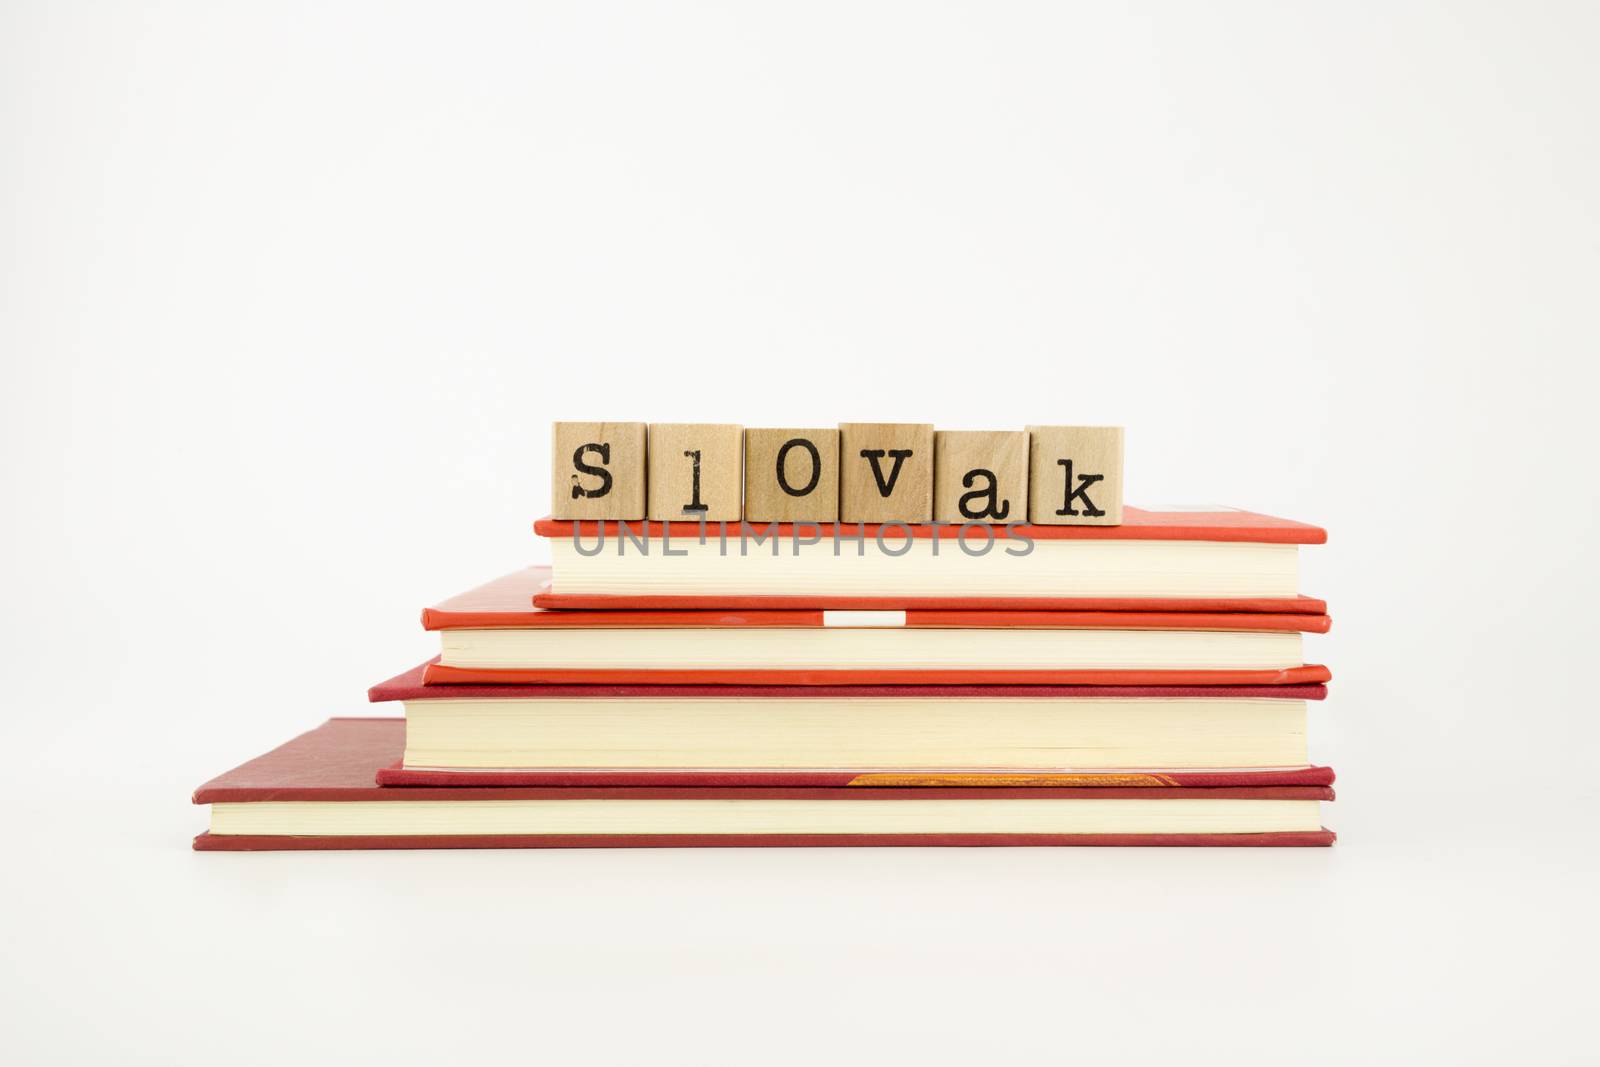 slovak language word on wood stamps and books by vinnstock